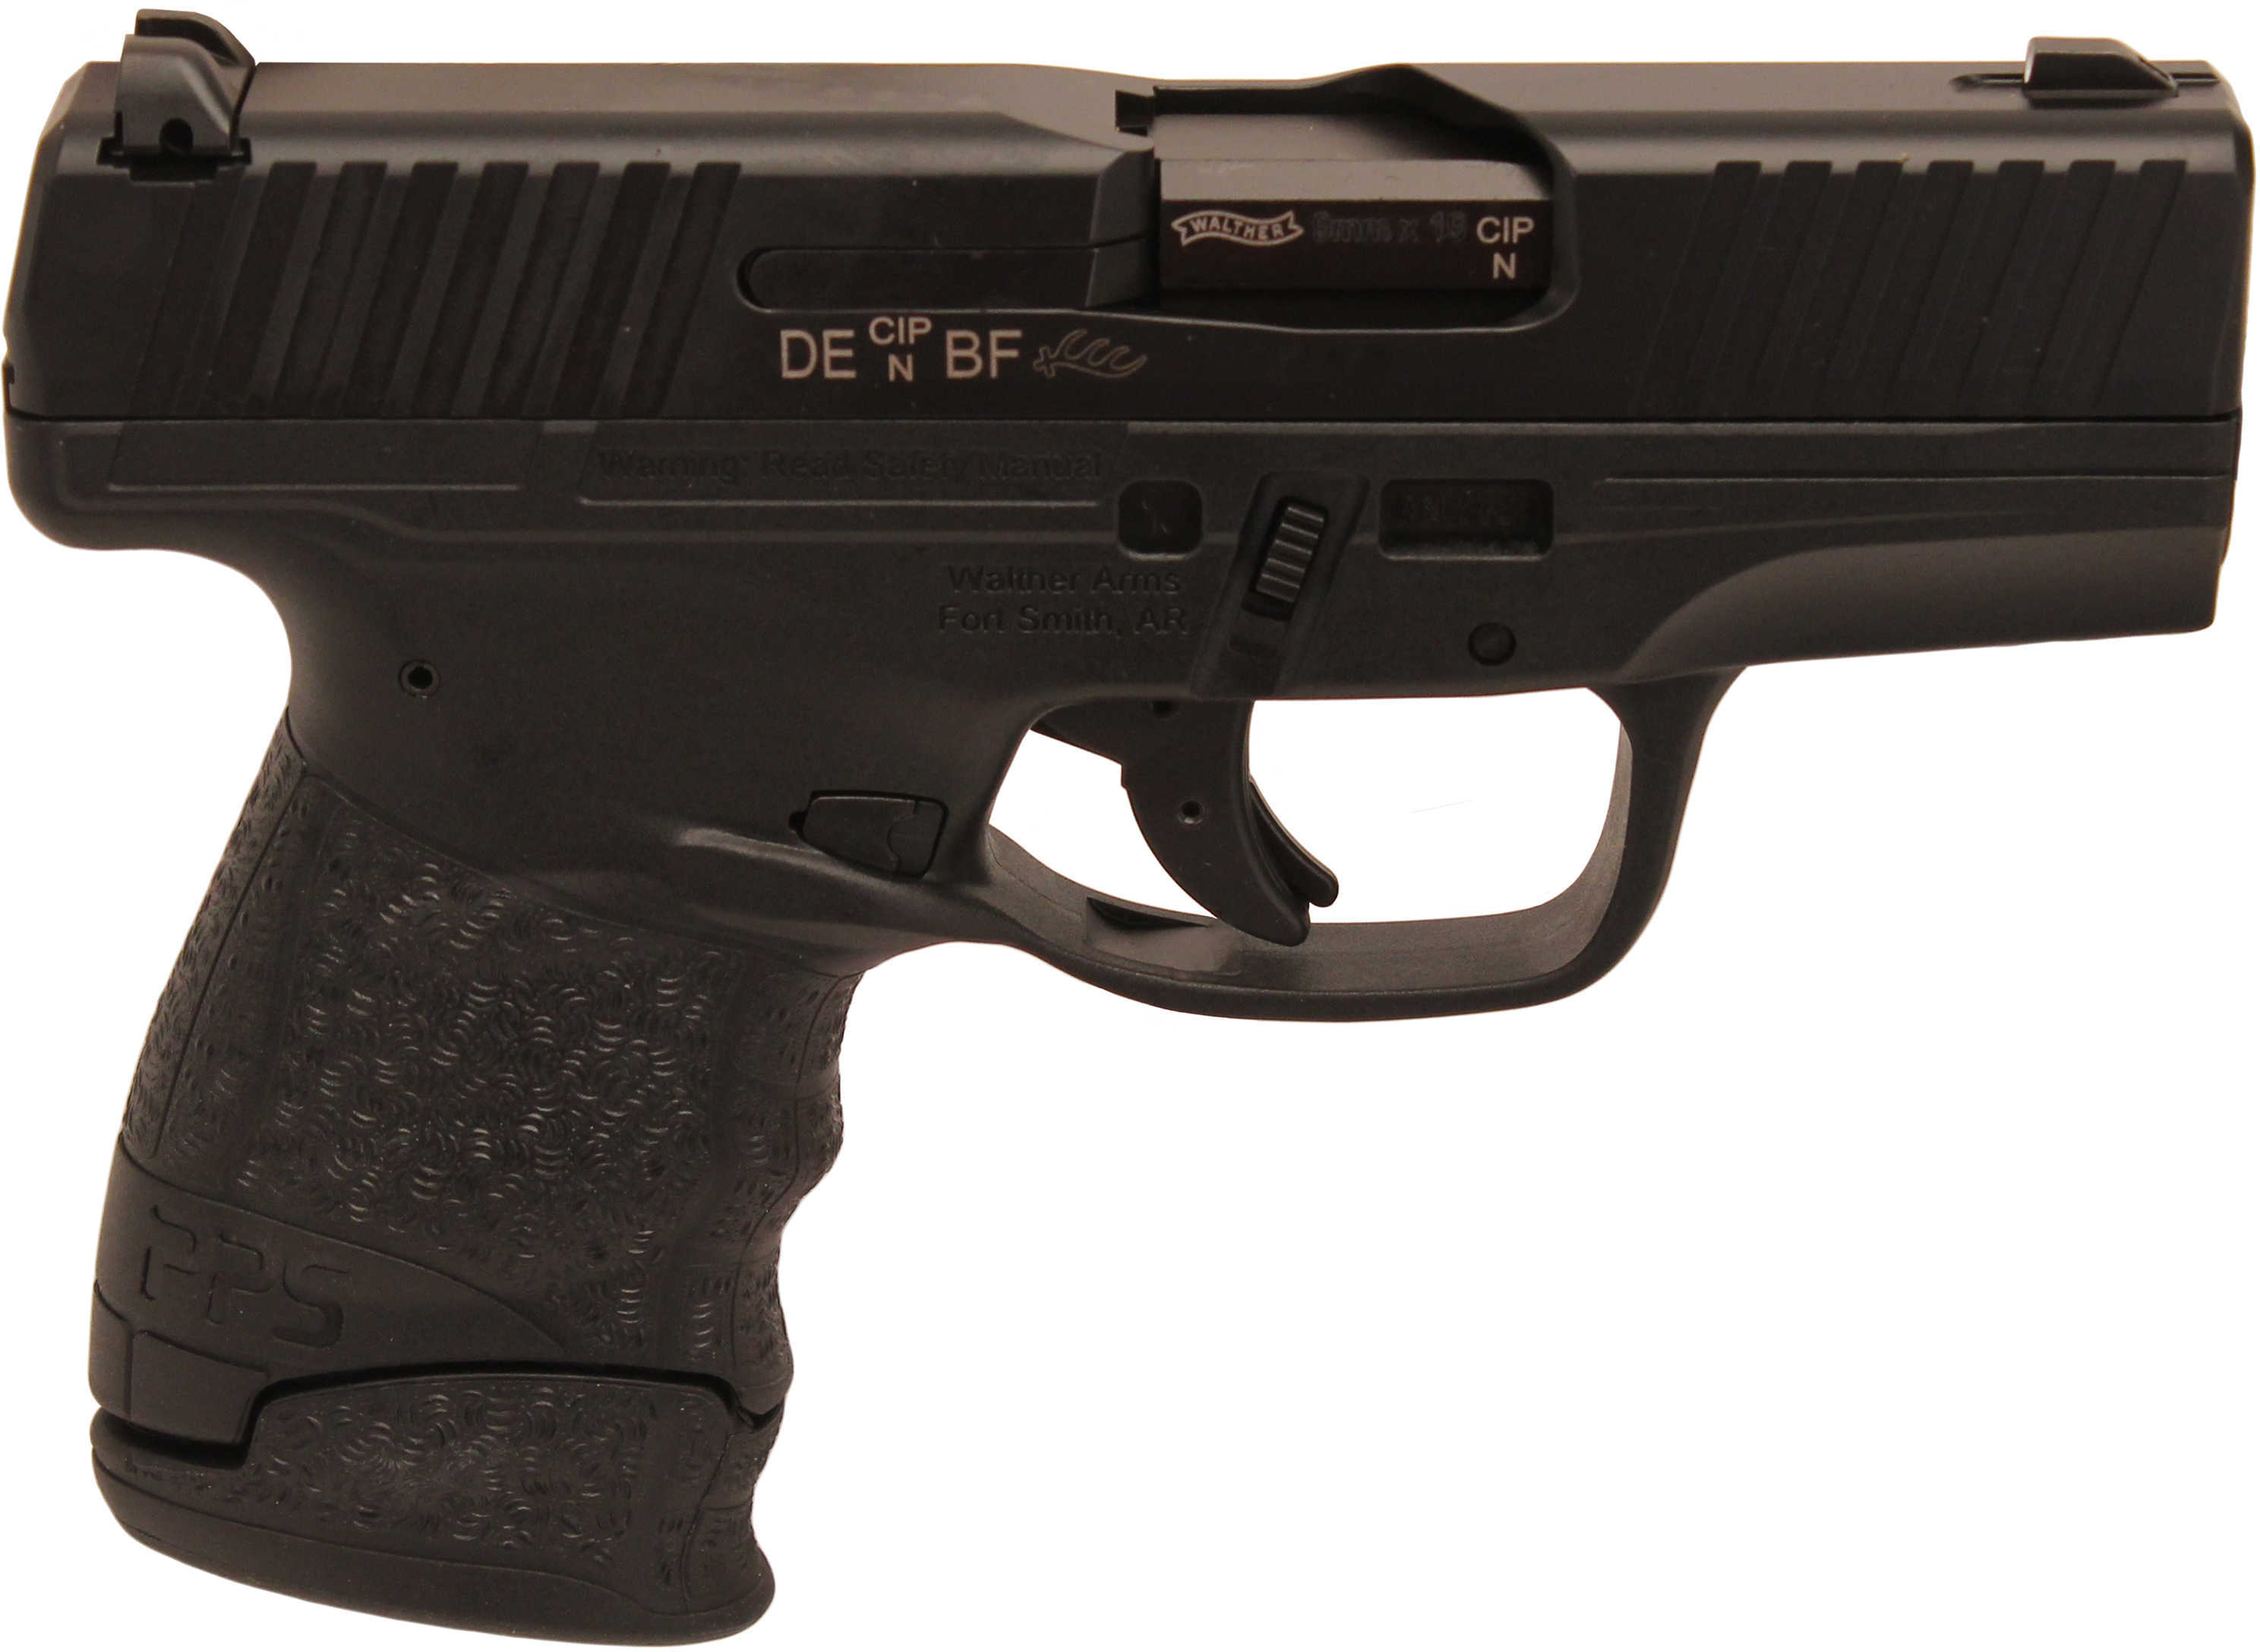 Walther PPS M2 Pistol 9mm 3.18" Barrel 6 and 7 Rounds Black, 2 Magazines